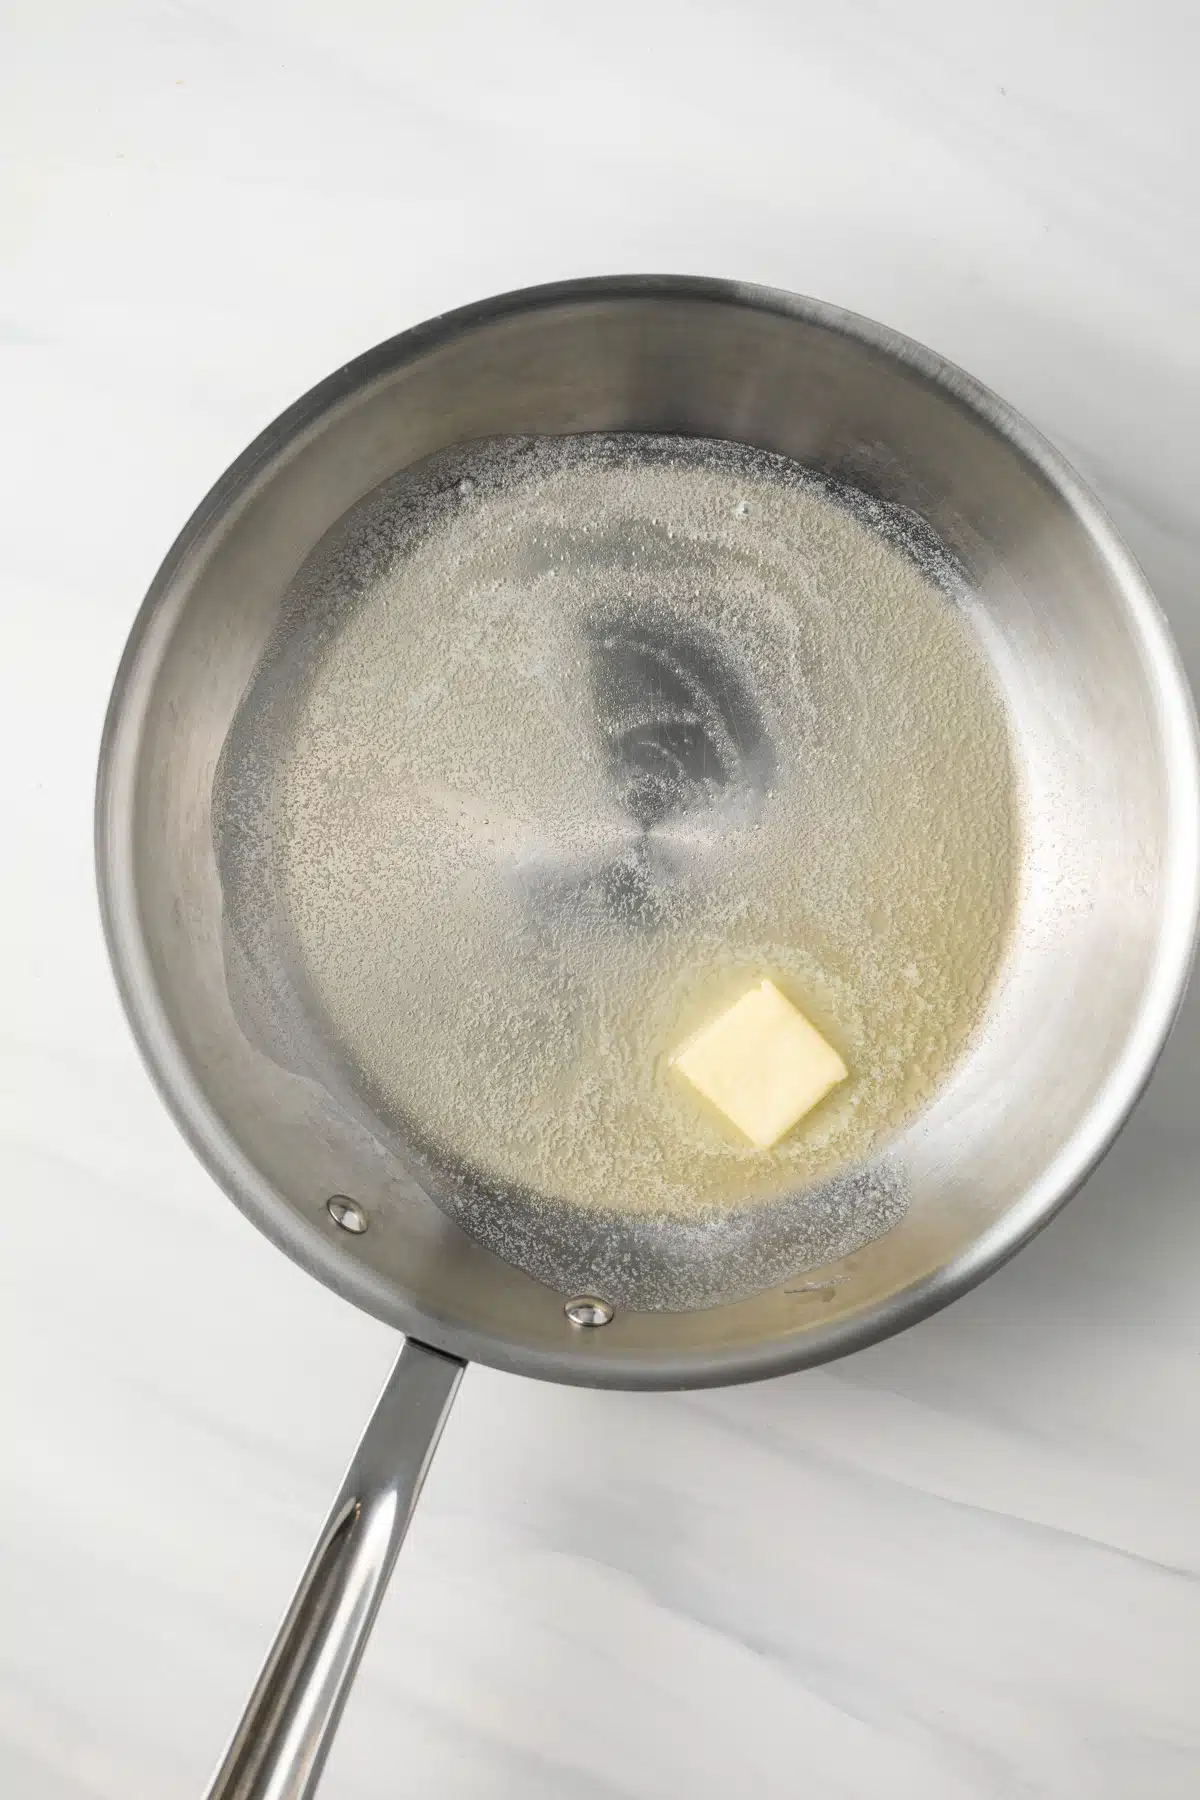 Melted butter in a skillet.